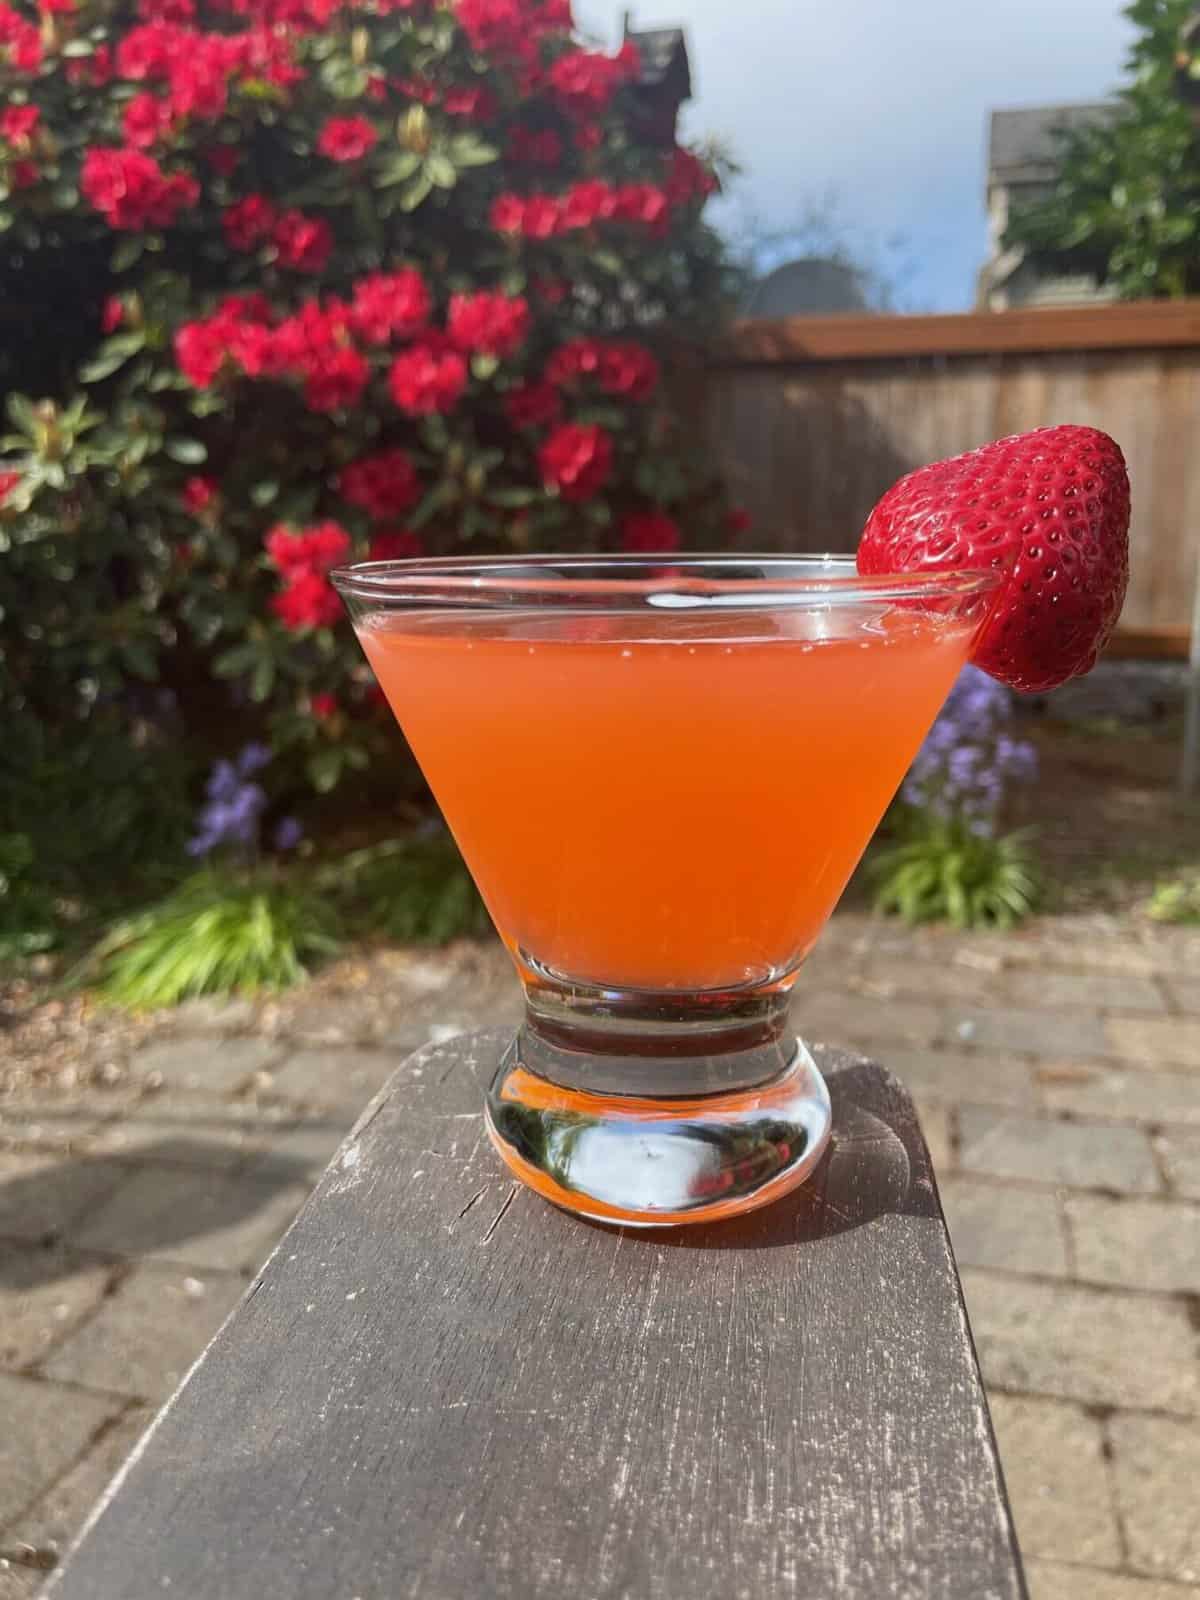 a martini glass with strawbery gimlet and garnished with a strawberry on a chair in a garden